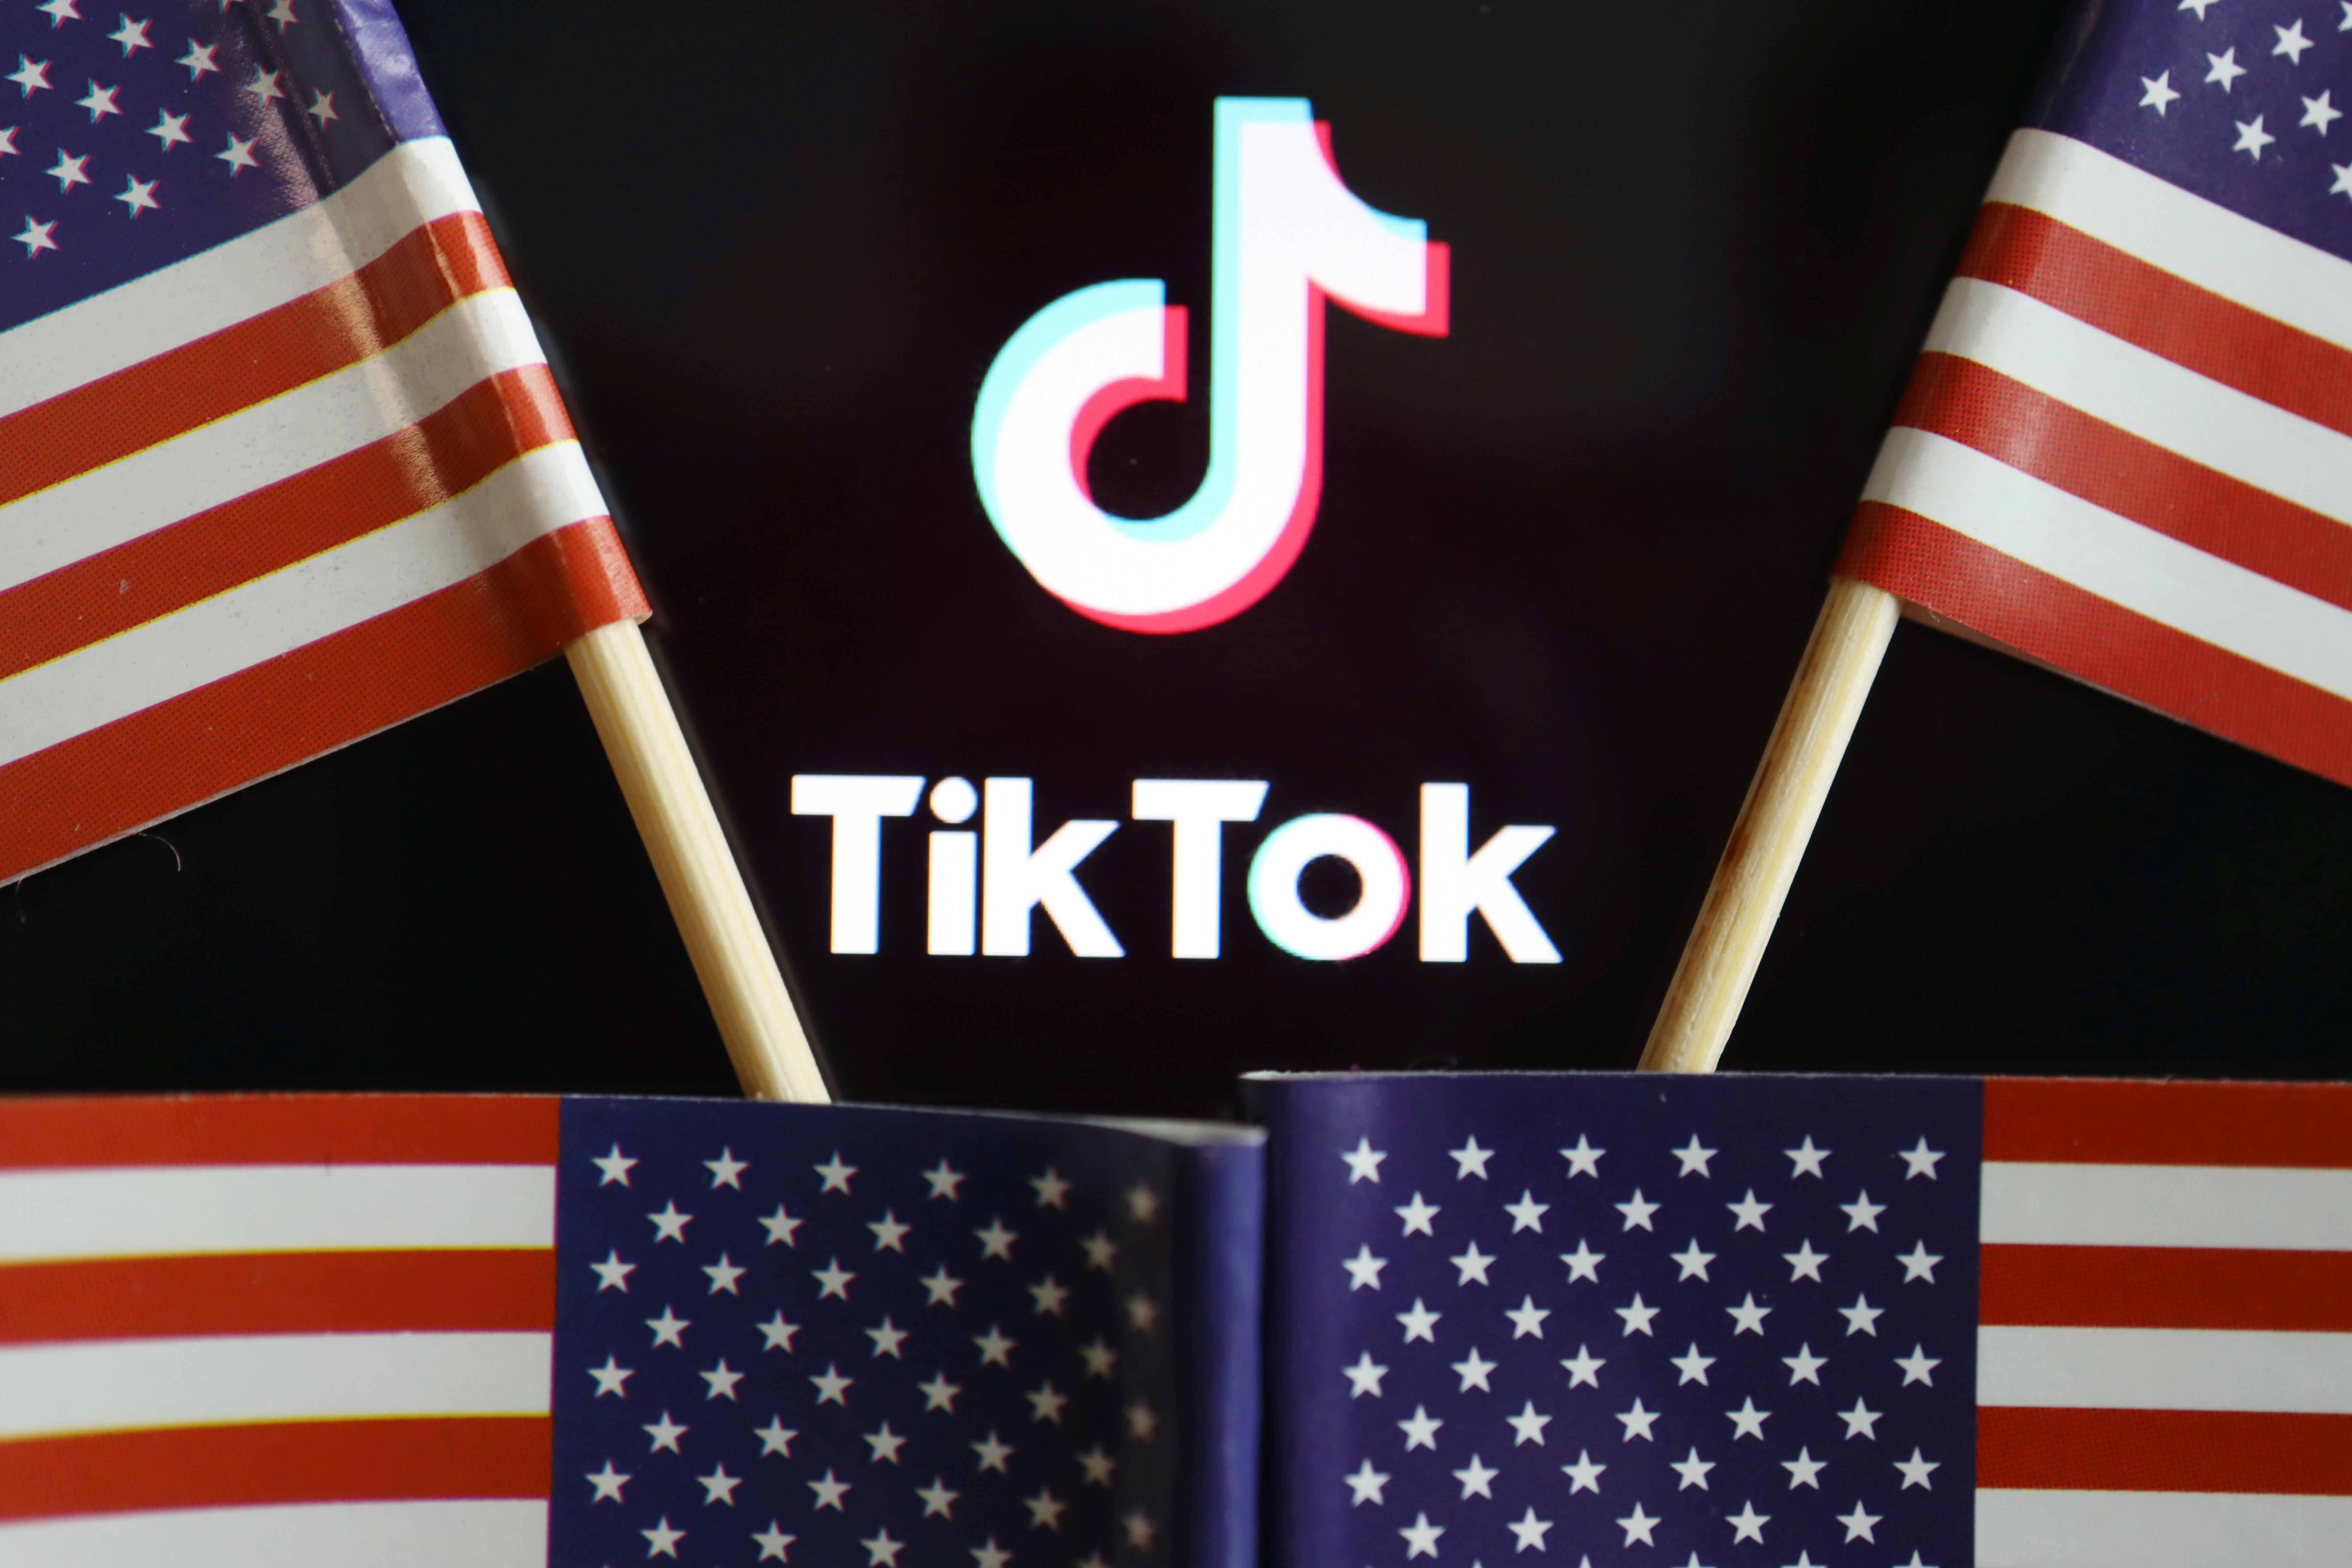 After rising to prominence, particularly among young people, TikTok is coming under increased scrutiny from the US government. Photo: Reuters